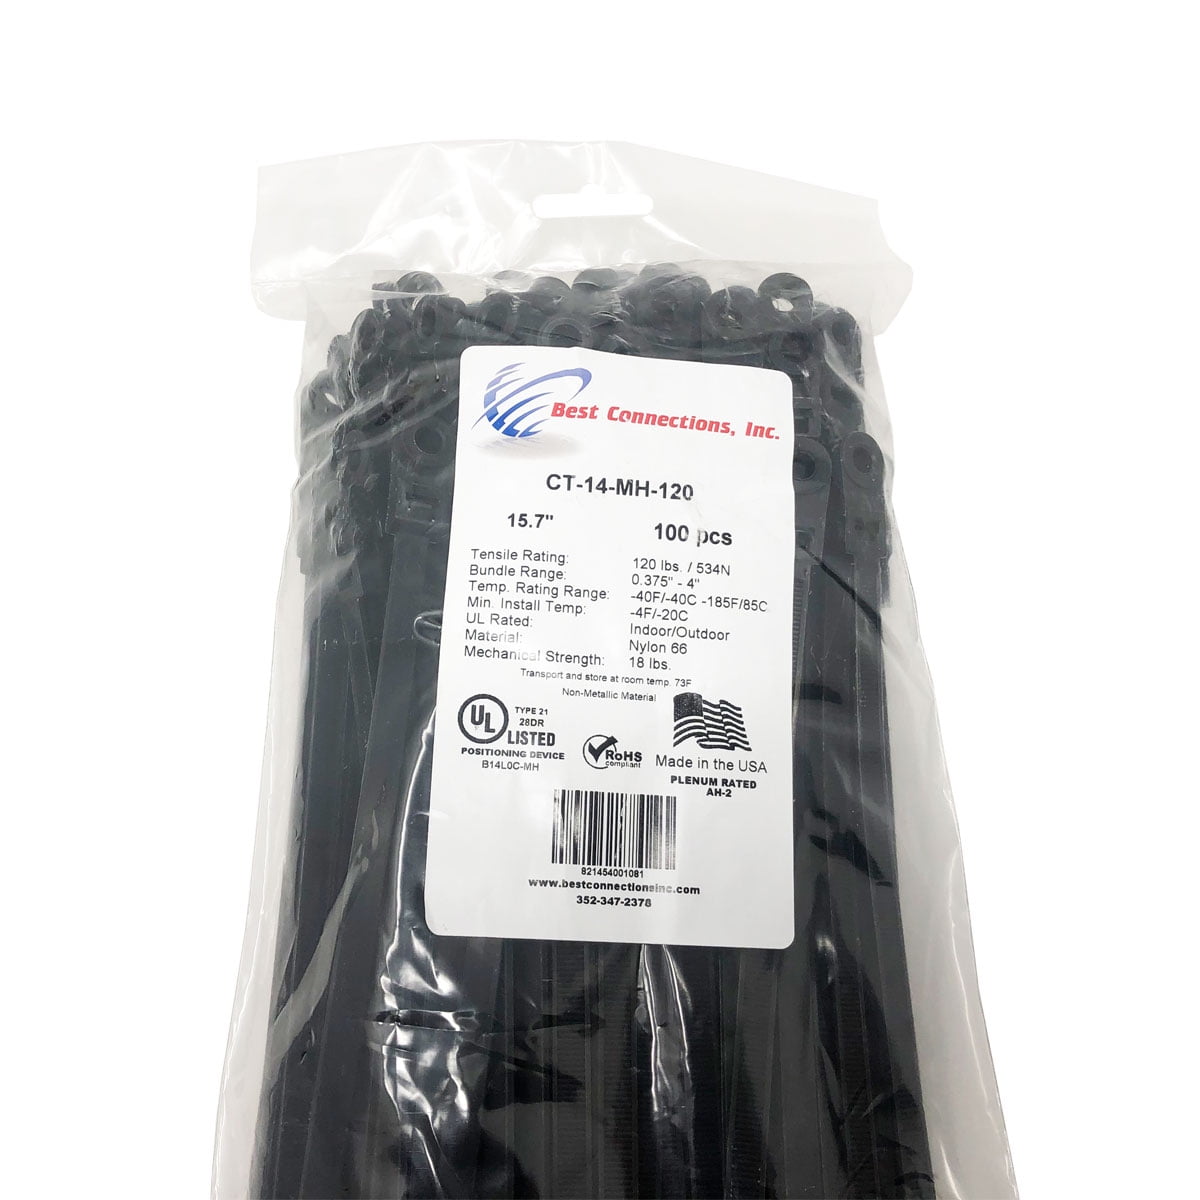 Made in the USA Cable Zip Ties 2000pcs Heavy Duty 120lb 14" UV Resistant Black 